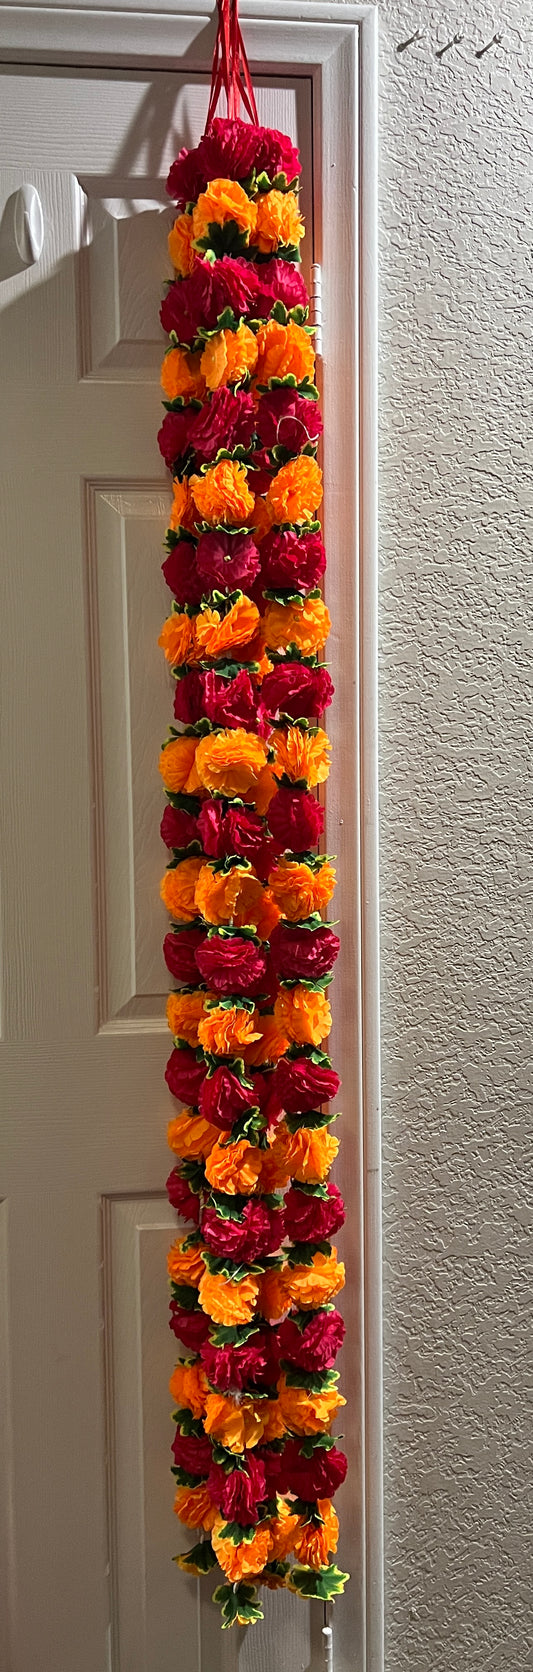 (Pack of 2) Garland for Decoration Long Strands Artificial Flowers, Indian Decor for Pooja/Diwali/Wedding/Christmas ~ 5 feet